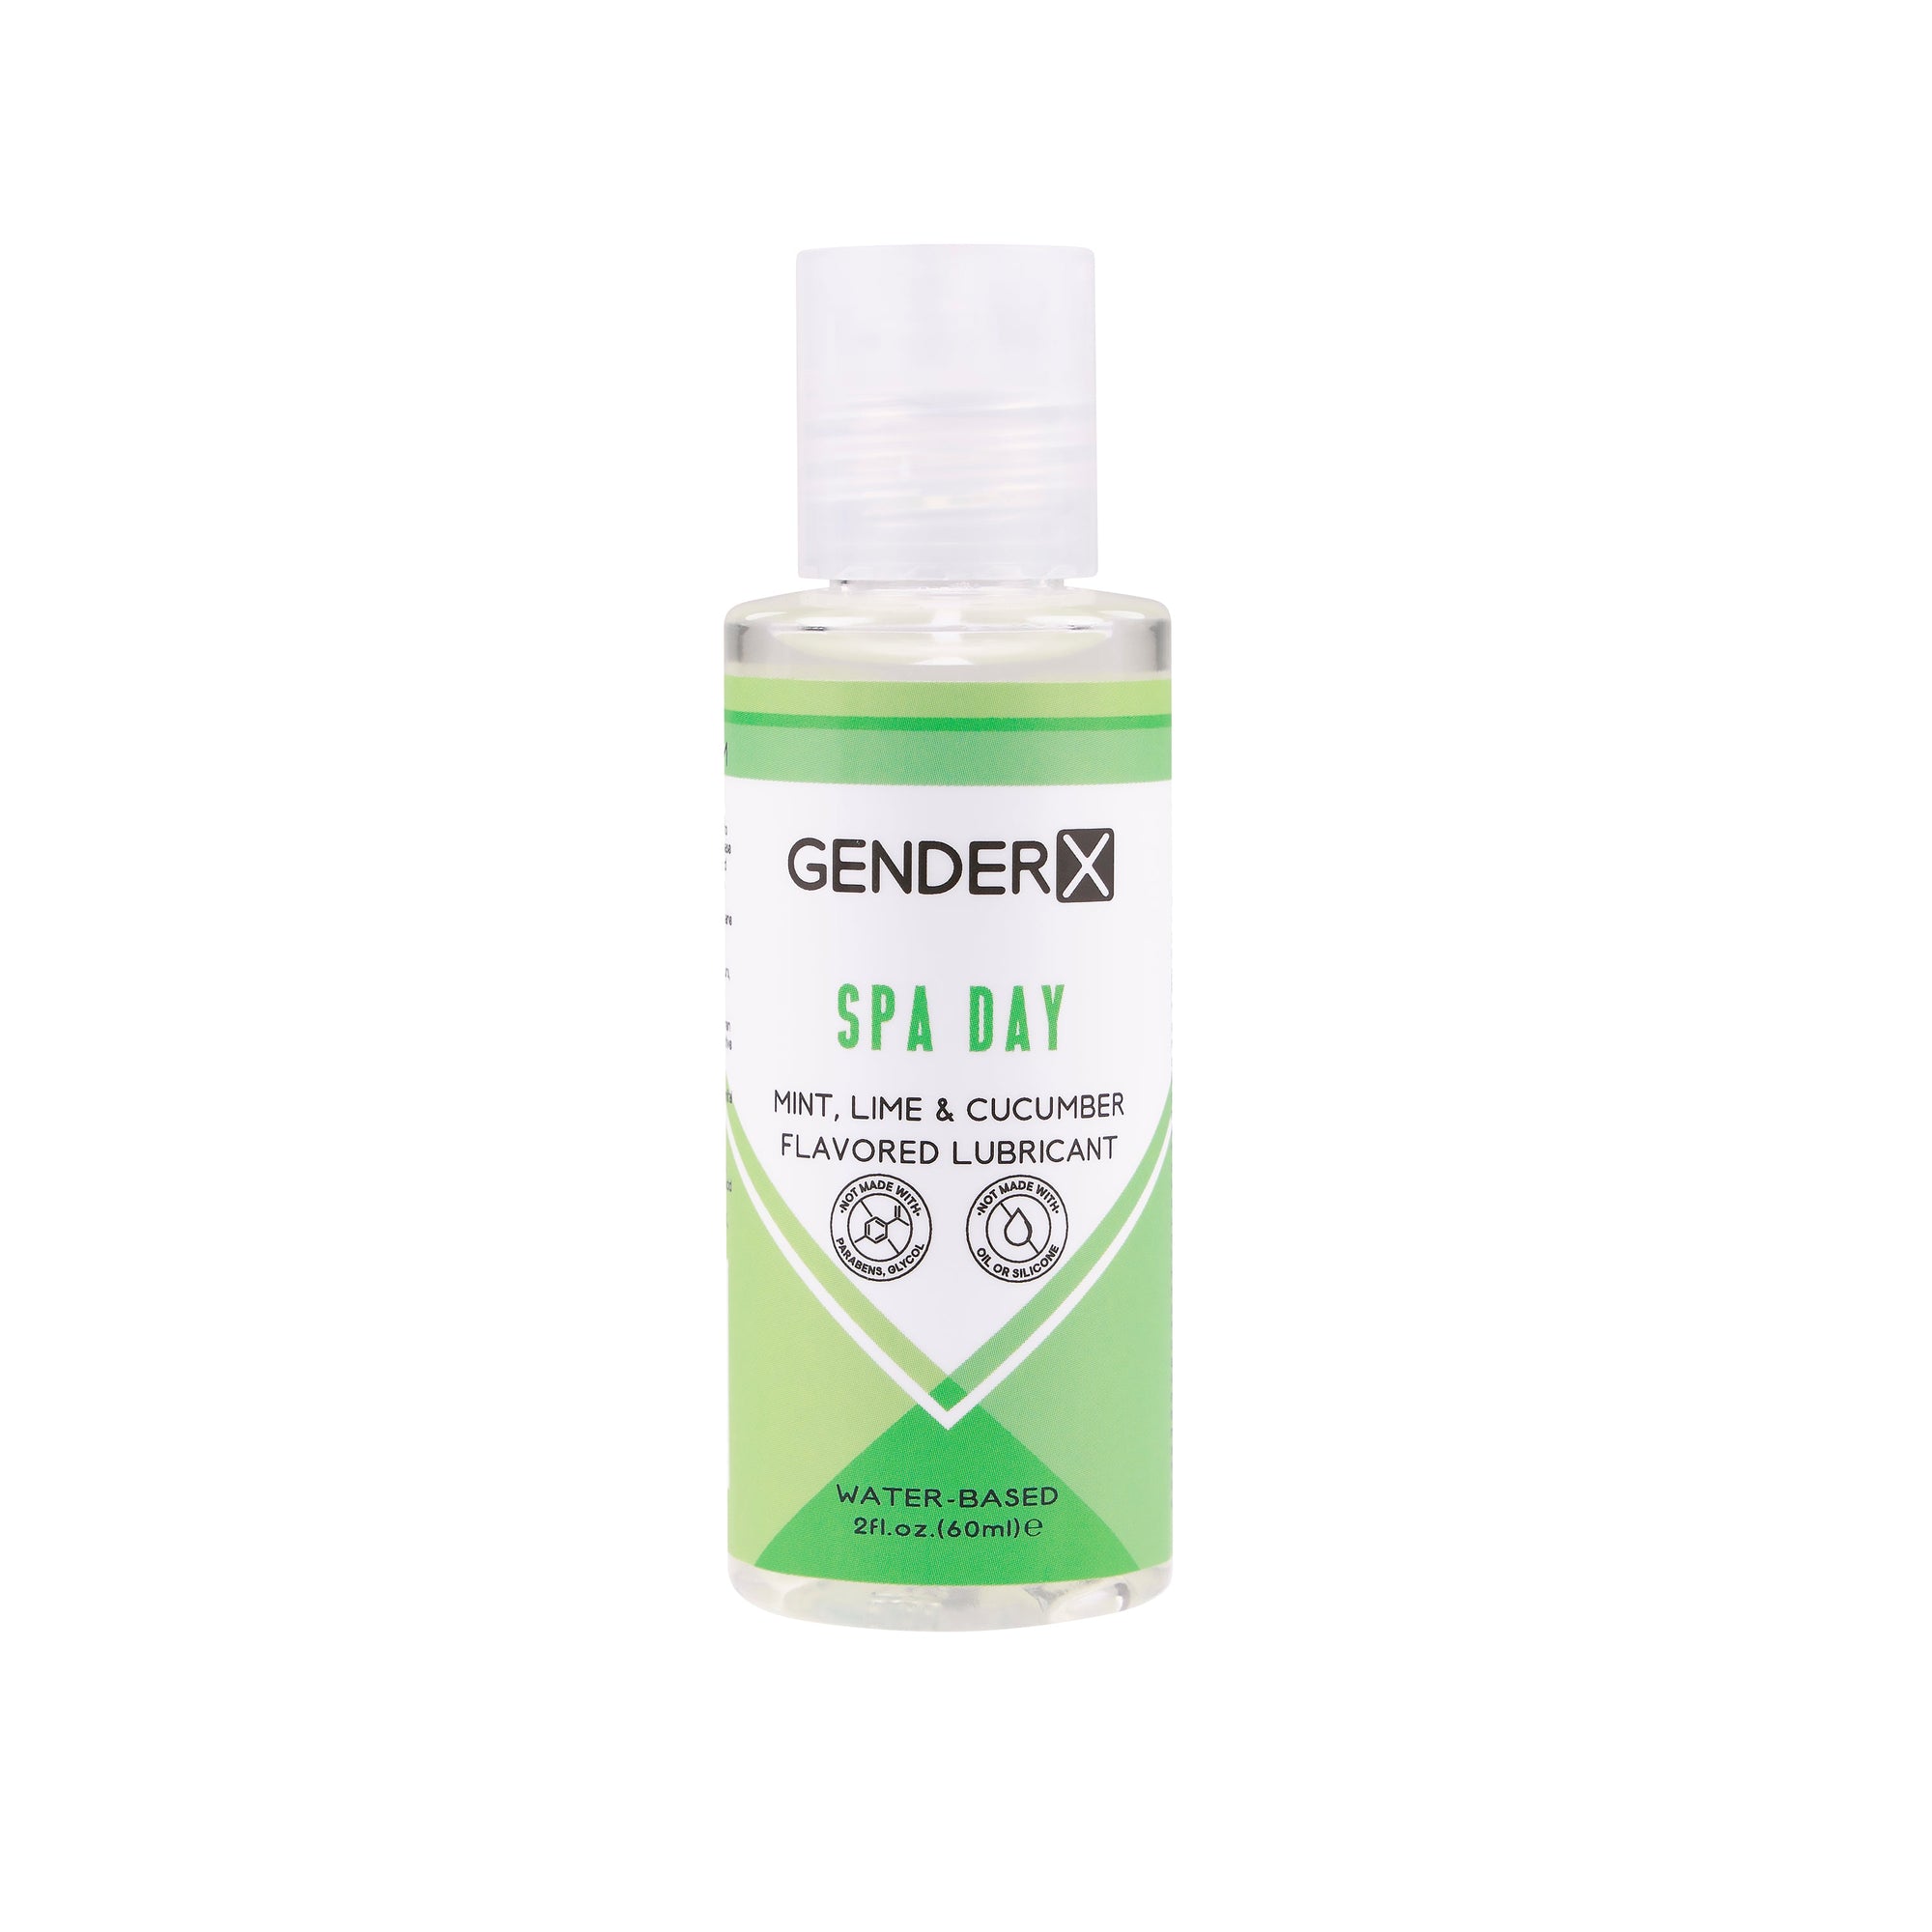 Evolved - Gender X Spa Day Mint Lime Cucumber Flavored Lube